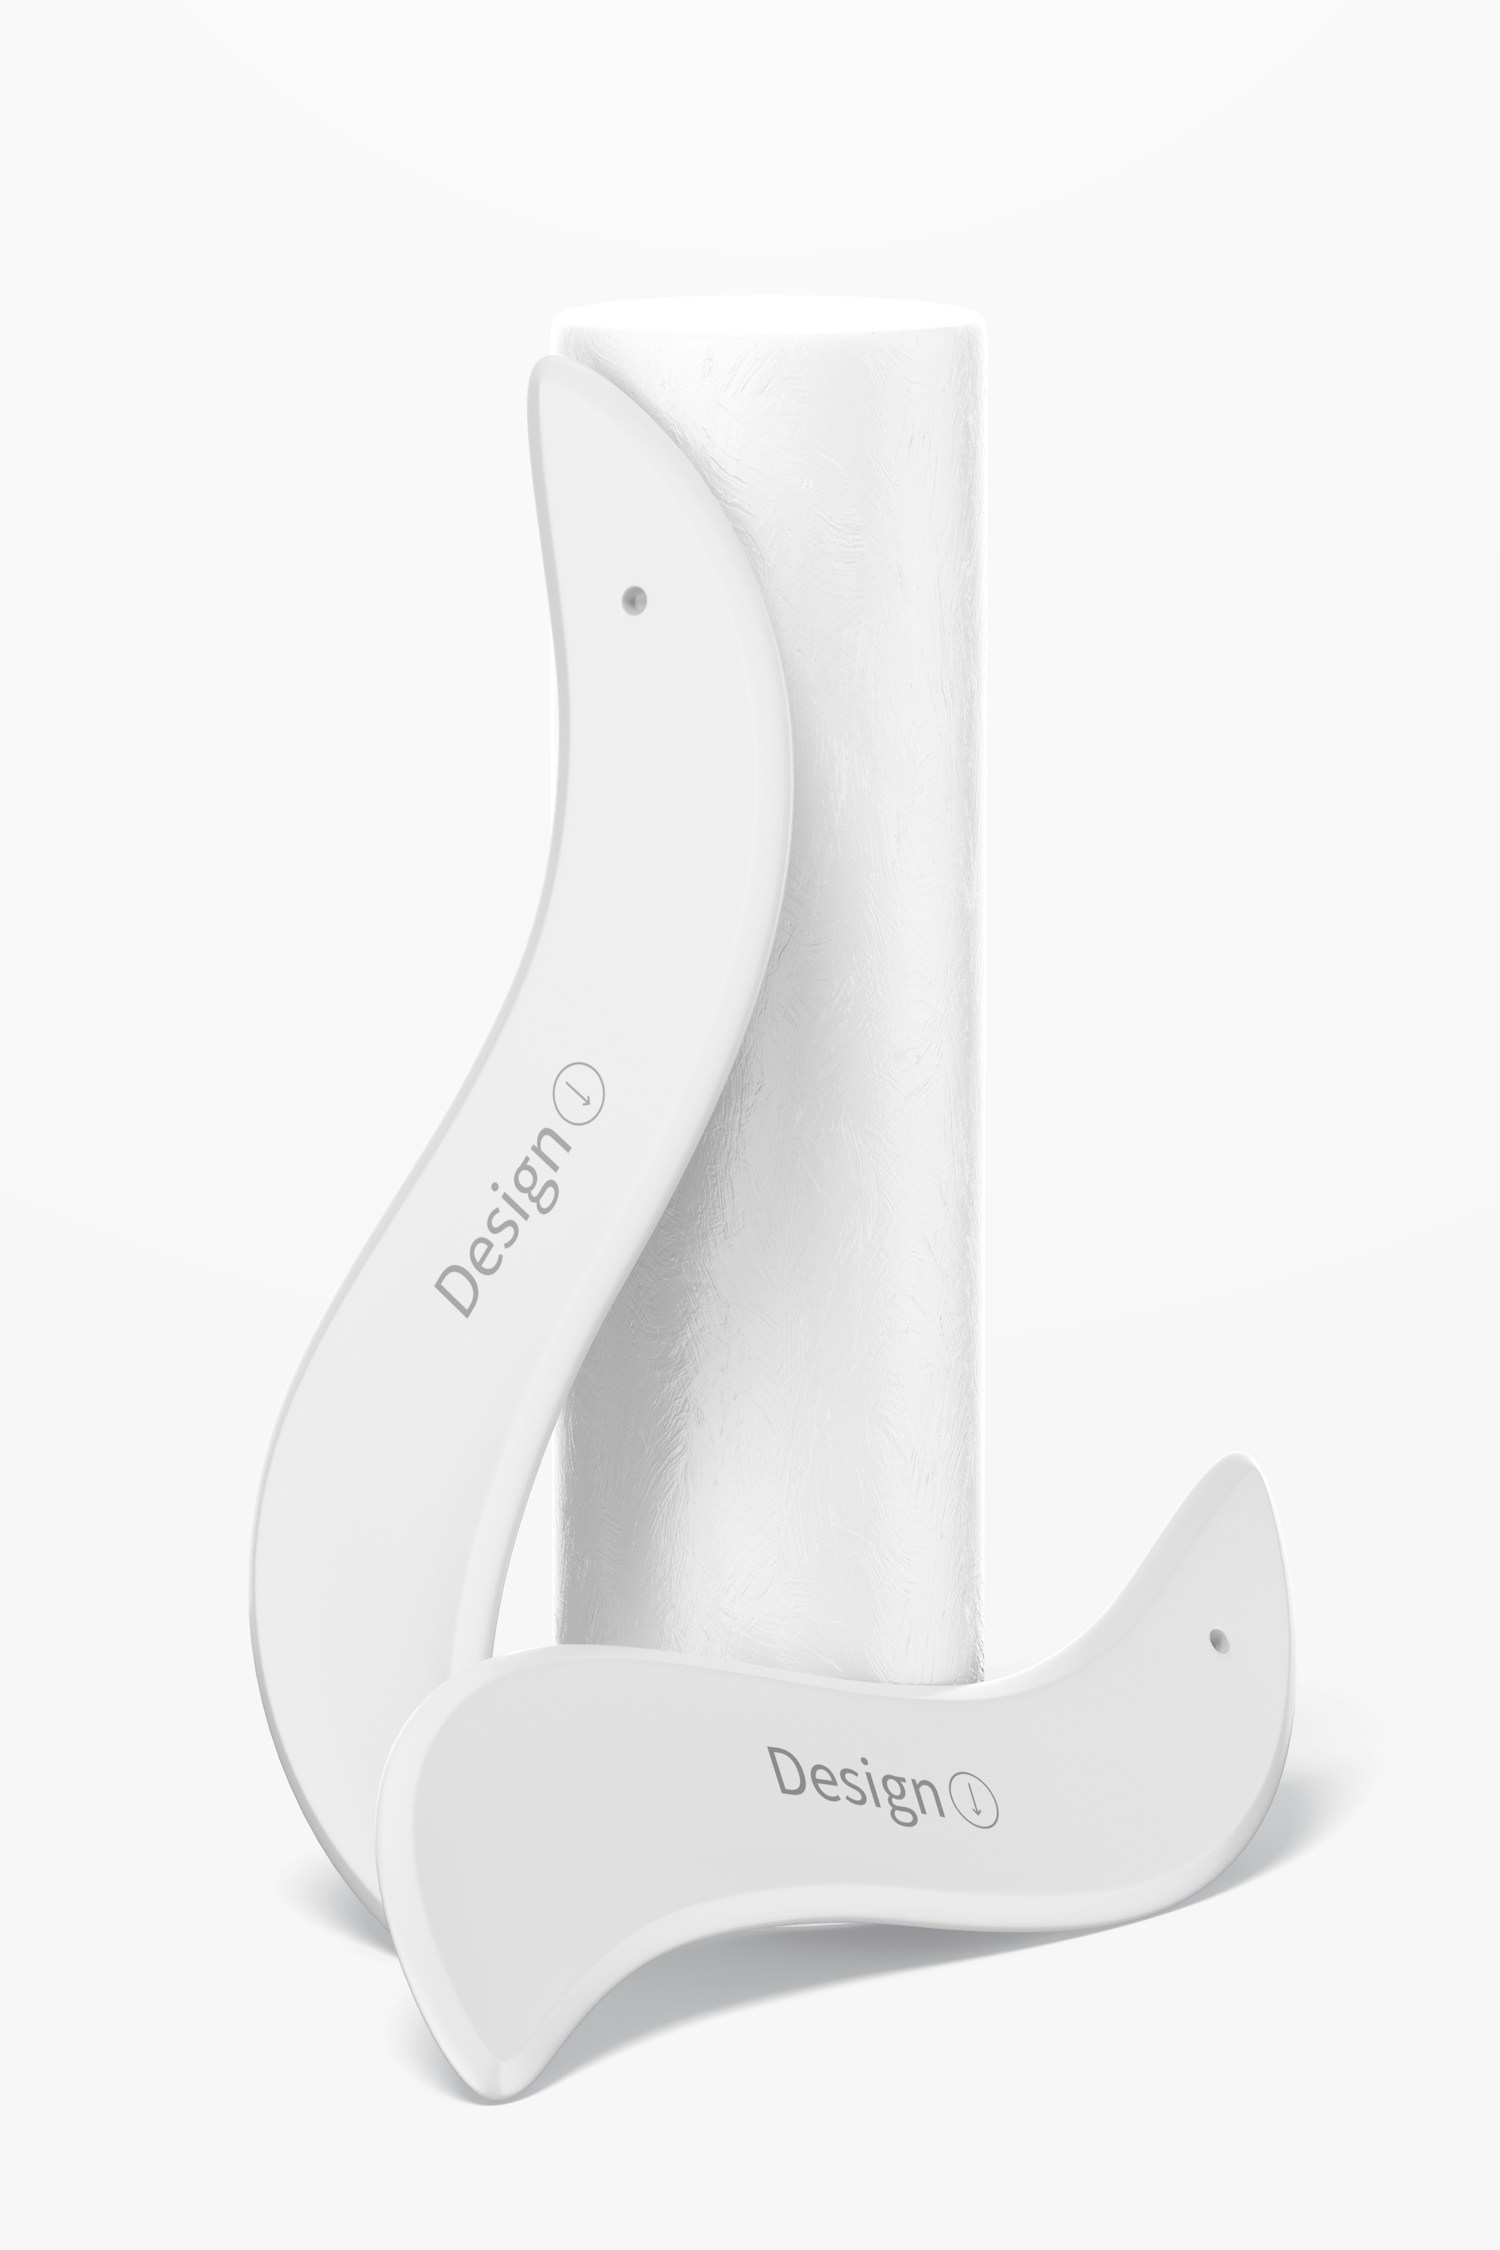 Body Massagers Mockup, Standing and Dropped